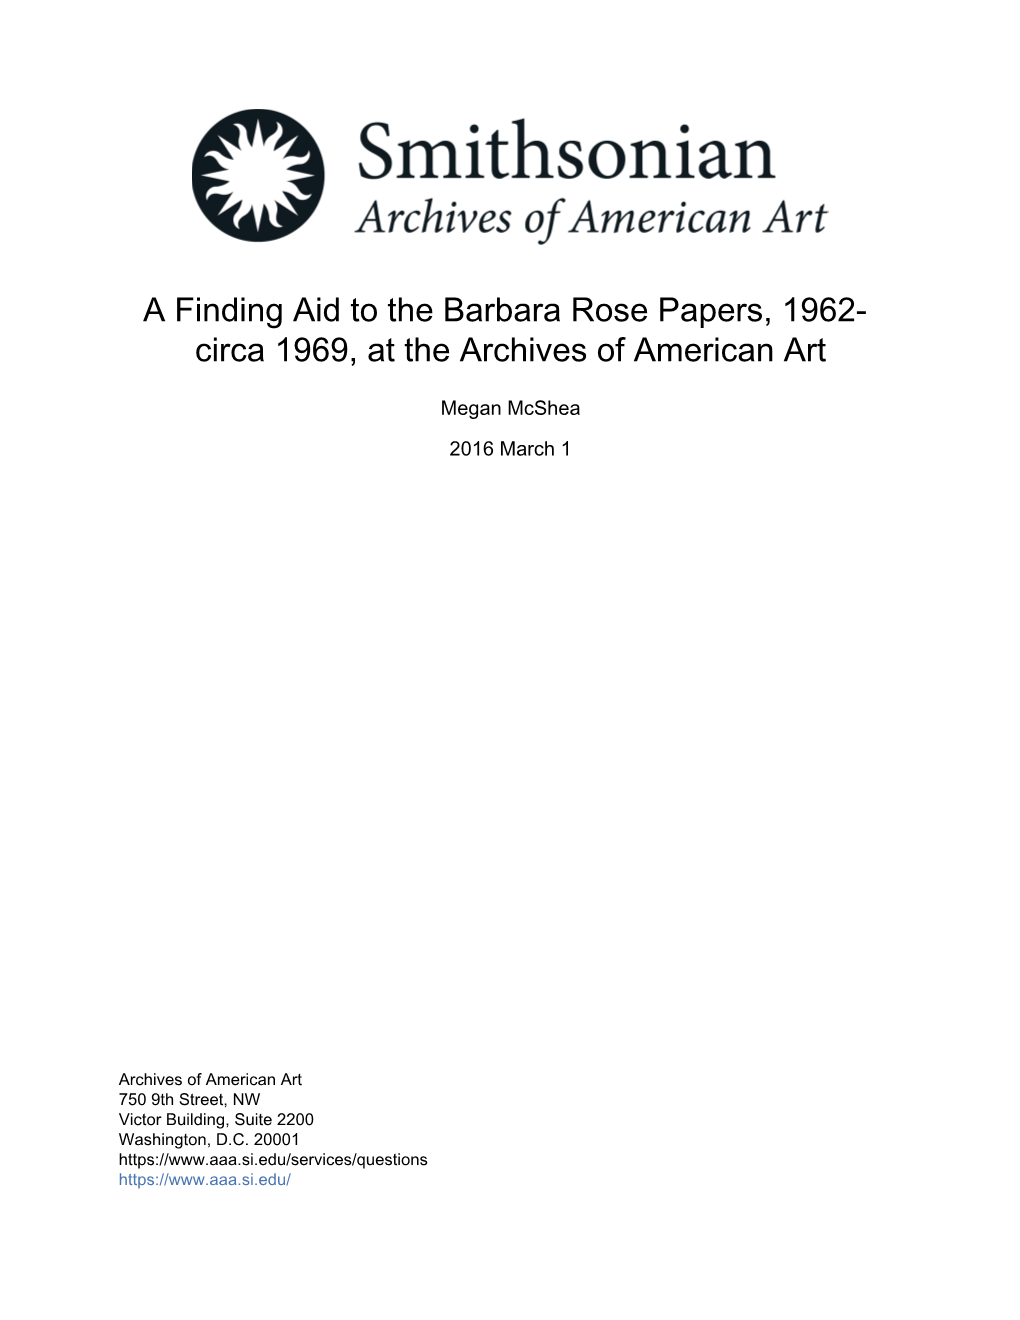 A Finding Aid to the Barbara Rose Papers, 1962- Circa 1969, at the Archives of American Art